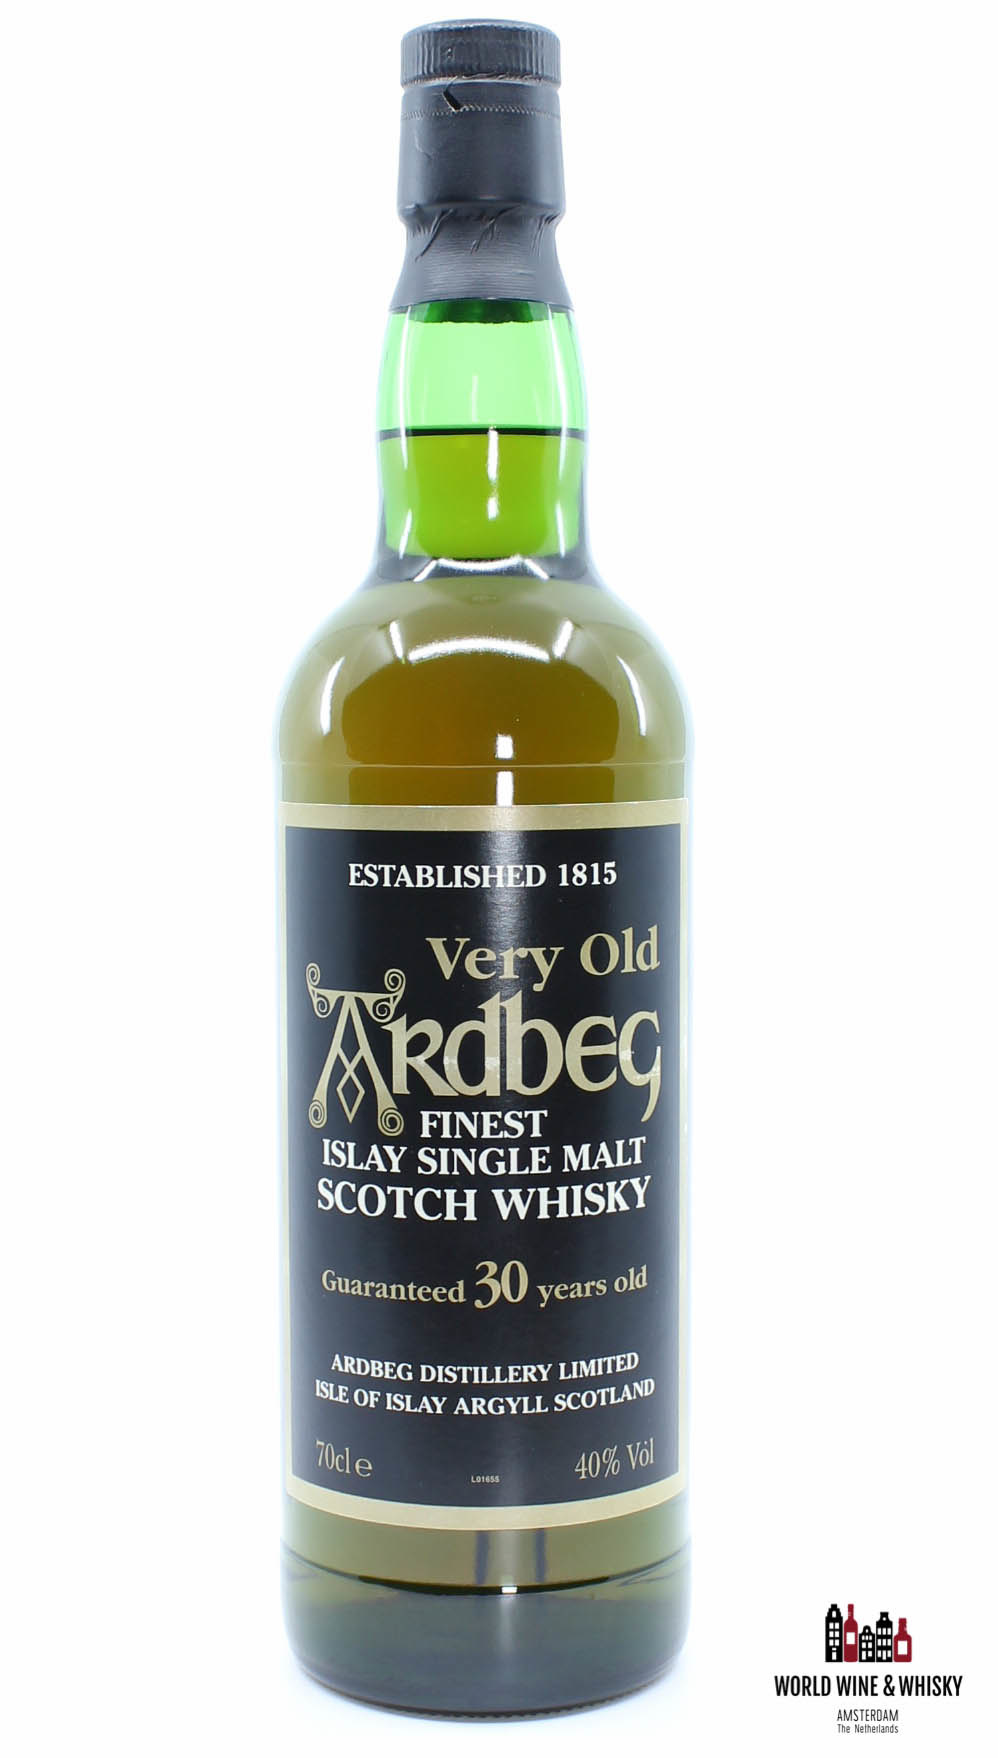 Ardbeg (アードベッグ) Very Old 30 years old